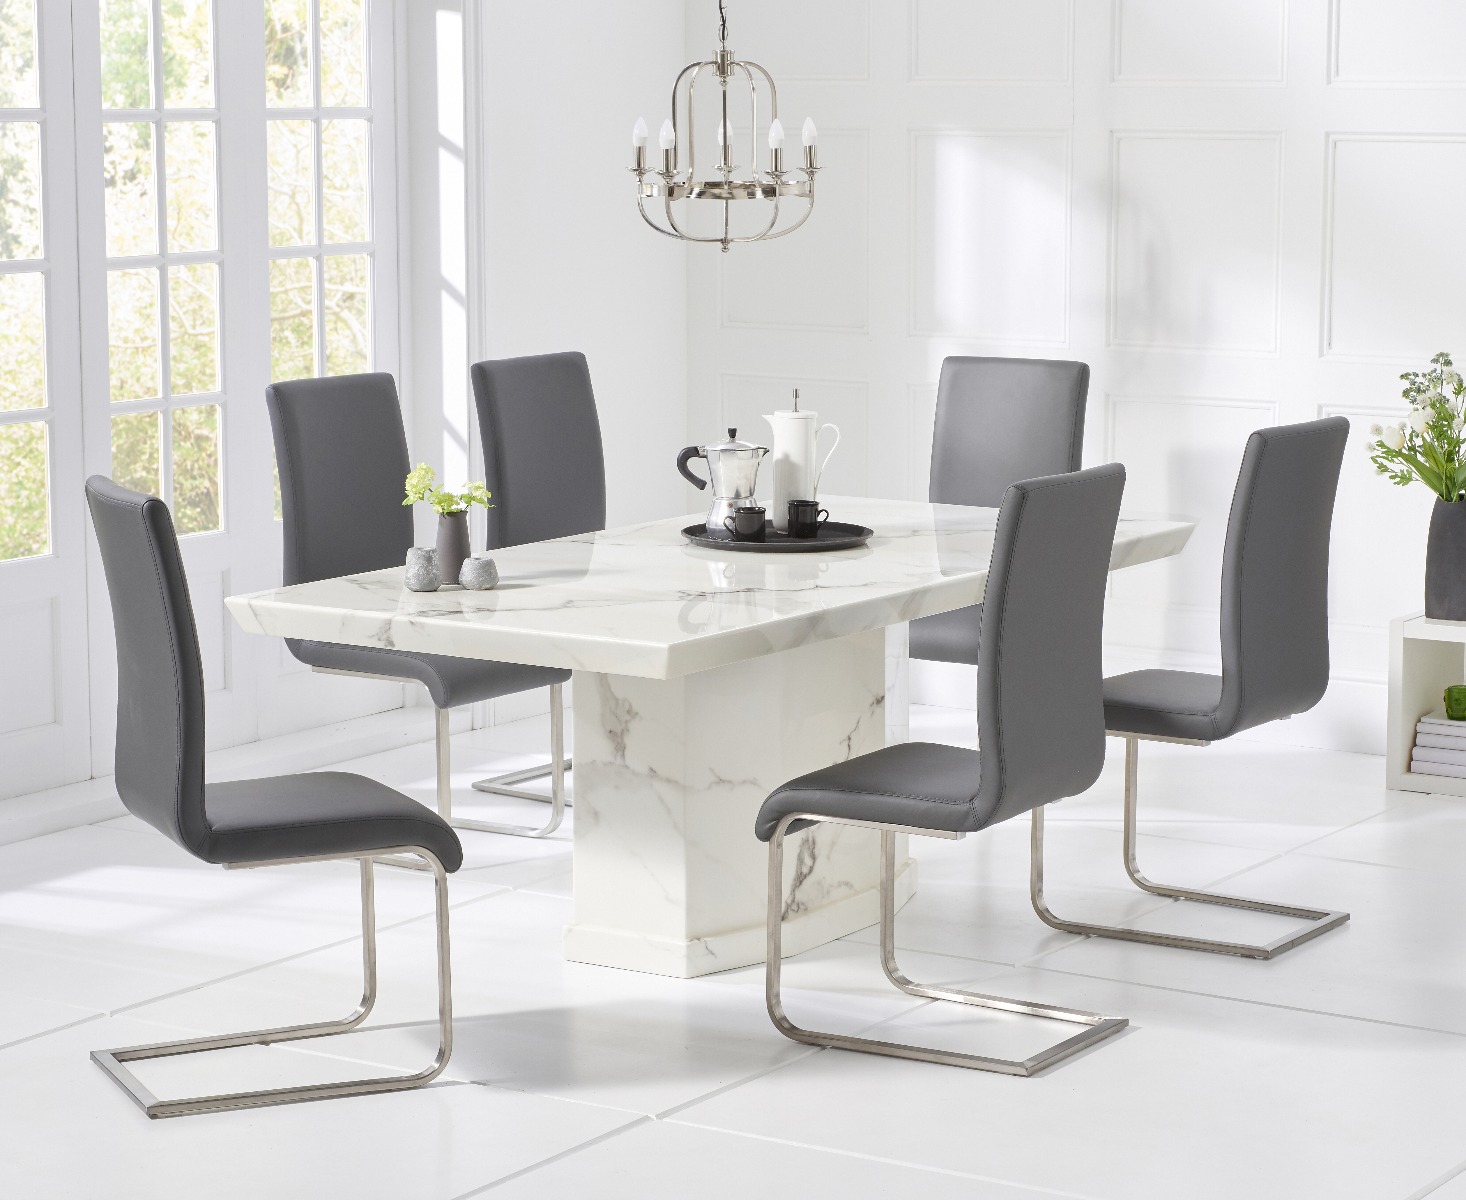 Carvelle 200cm White Pedestal Marble Dining Table With 12 Black Malaga Chairs